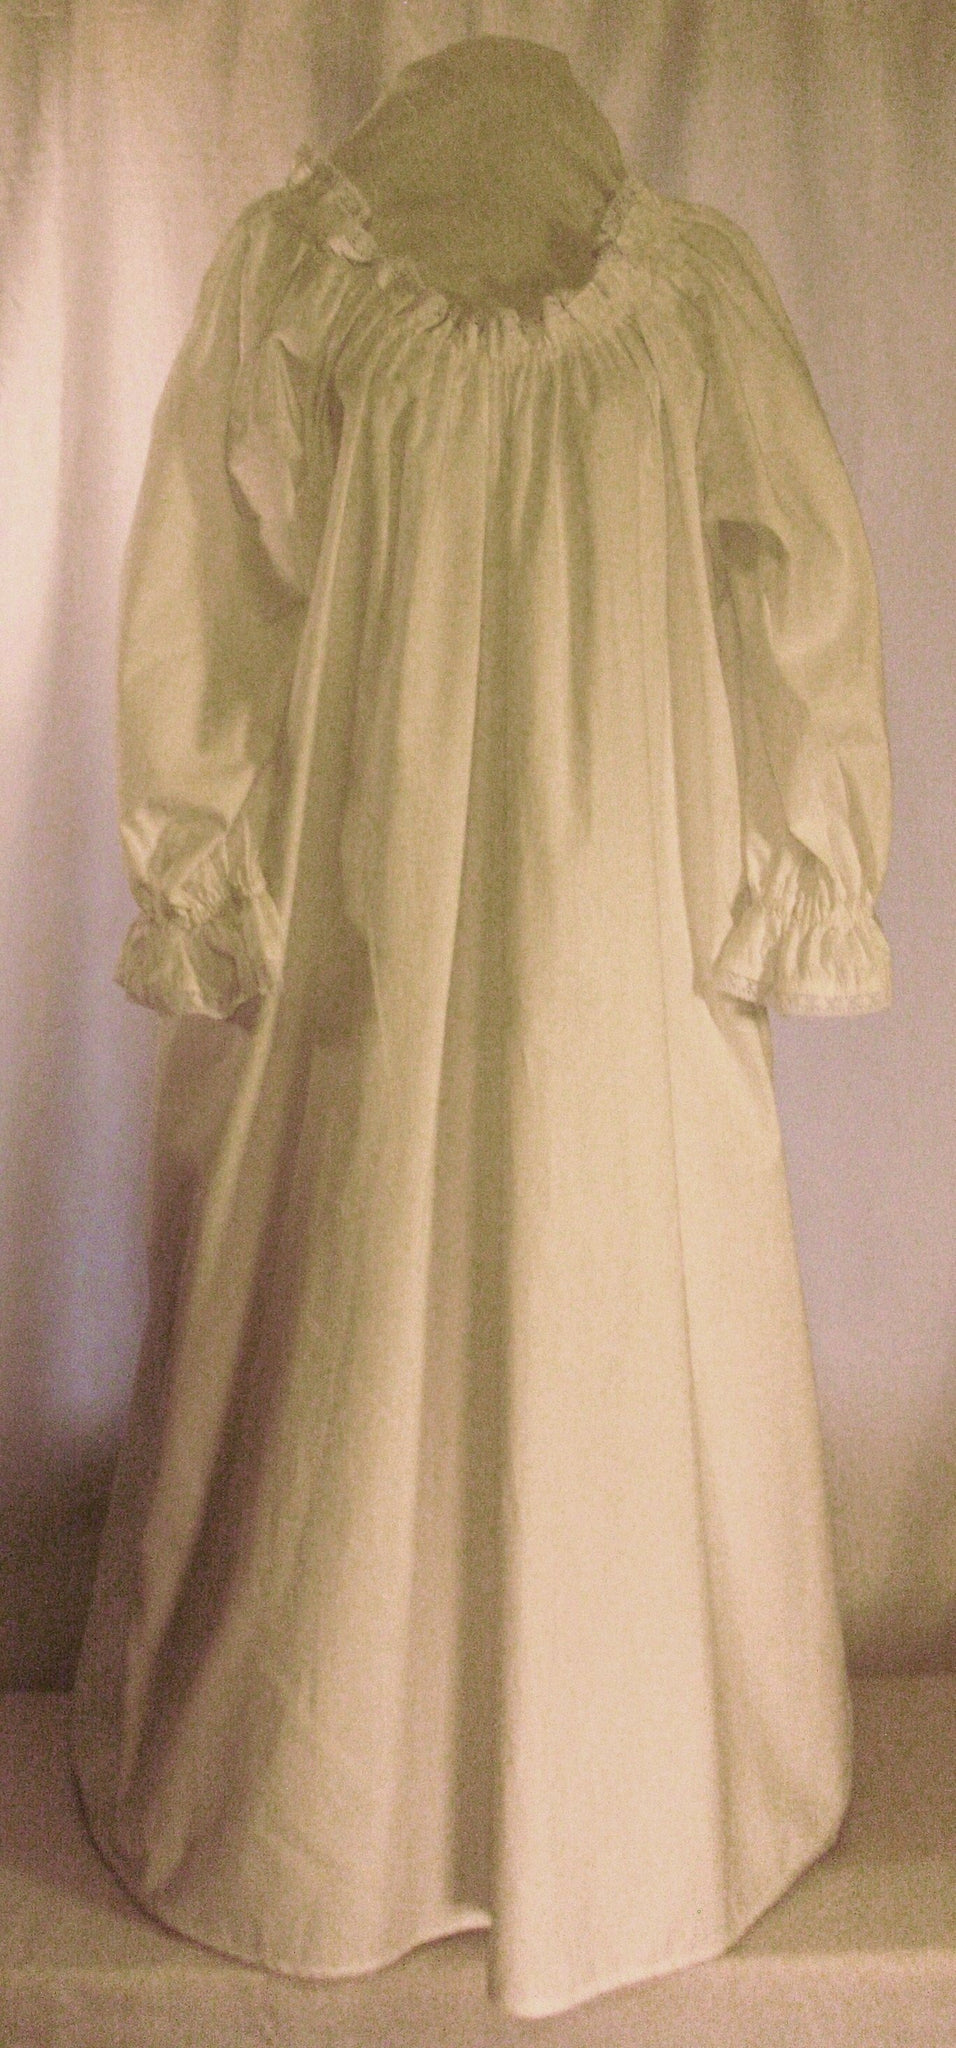 Night gown  Night gown, 18th century chemise, 18th century fashion